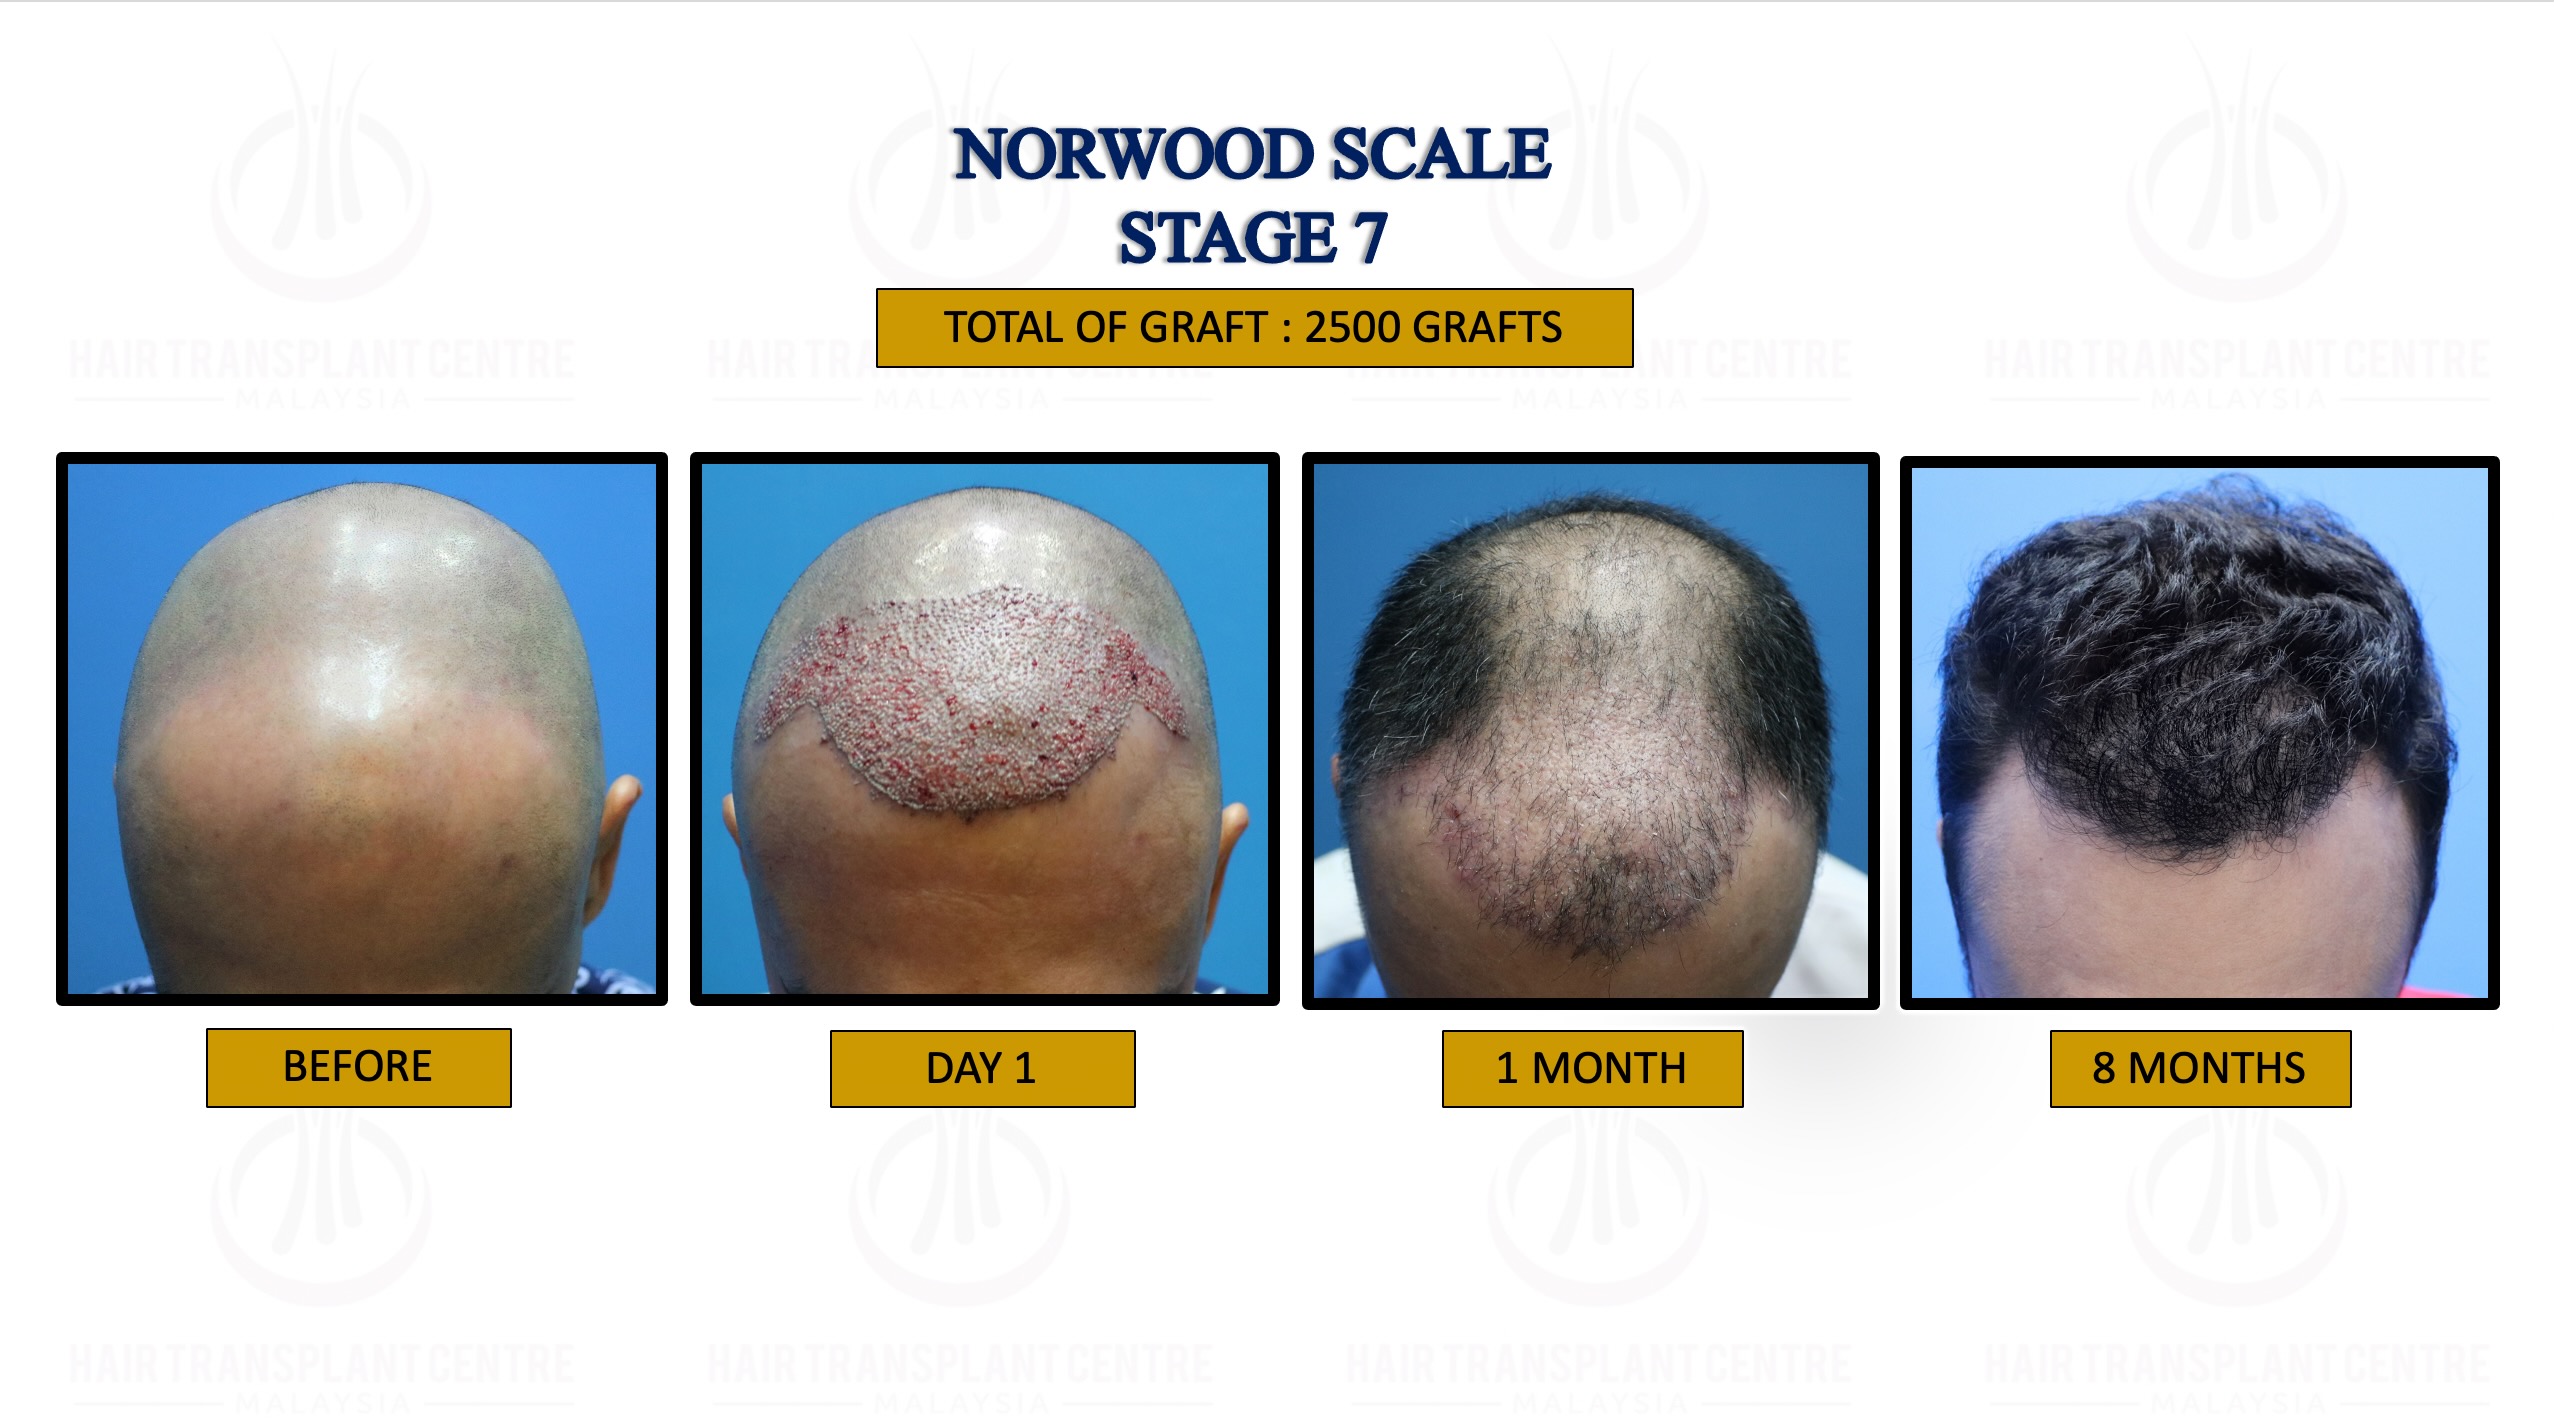 20. NORWOOD SCALE STAGE 7.